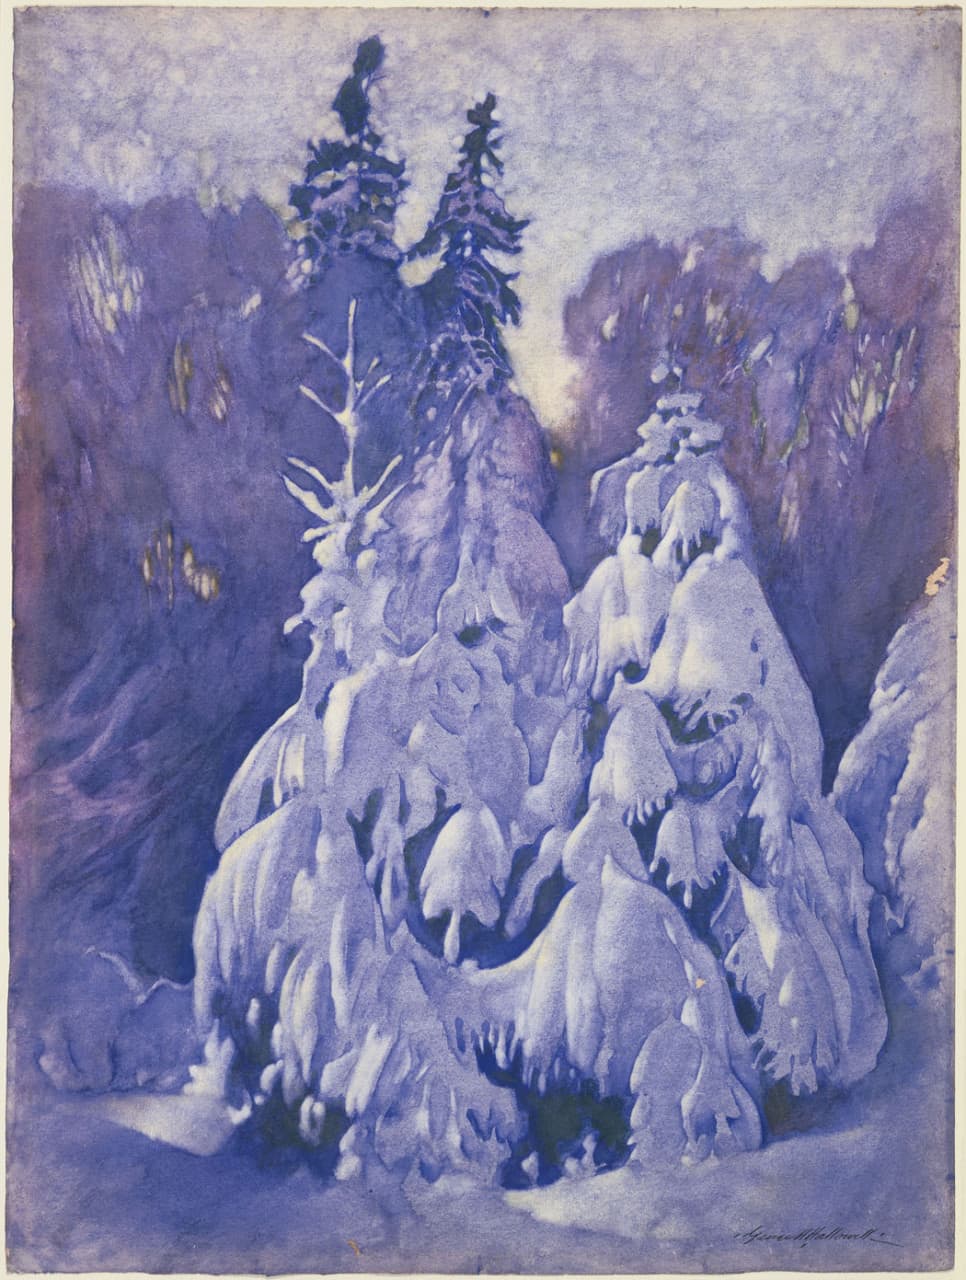 Boston artist George Hawley Hallowell painted this watercolor "Snow Drapery" somewhere between 1890 and 1910. (Museum of Fine Arts, Boston)